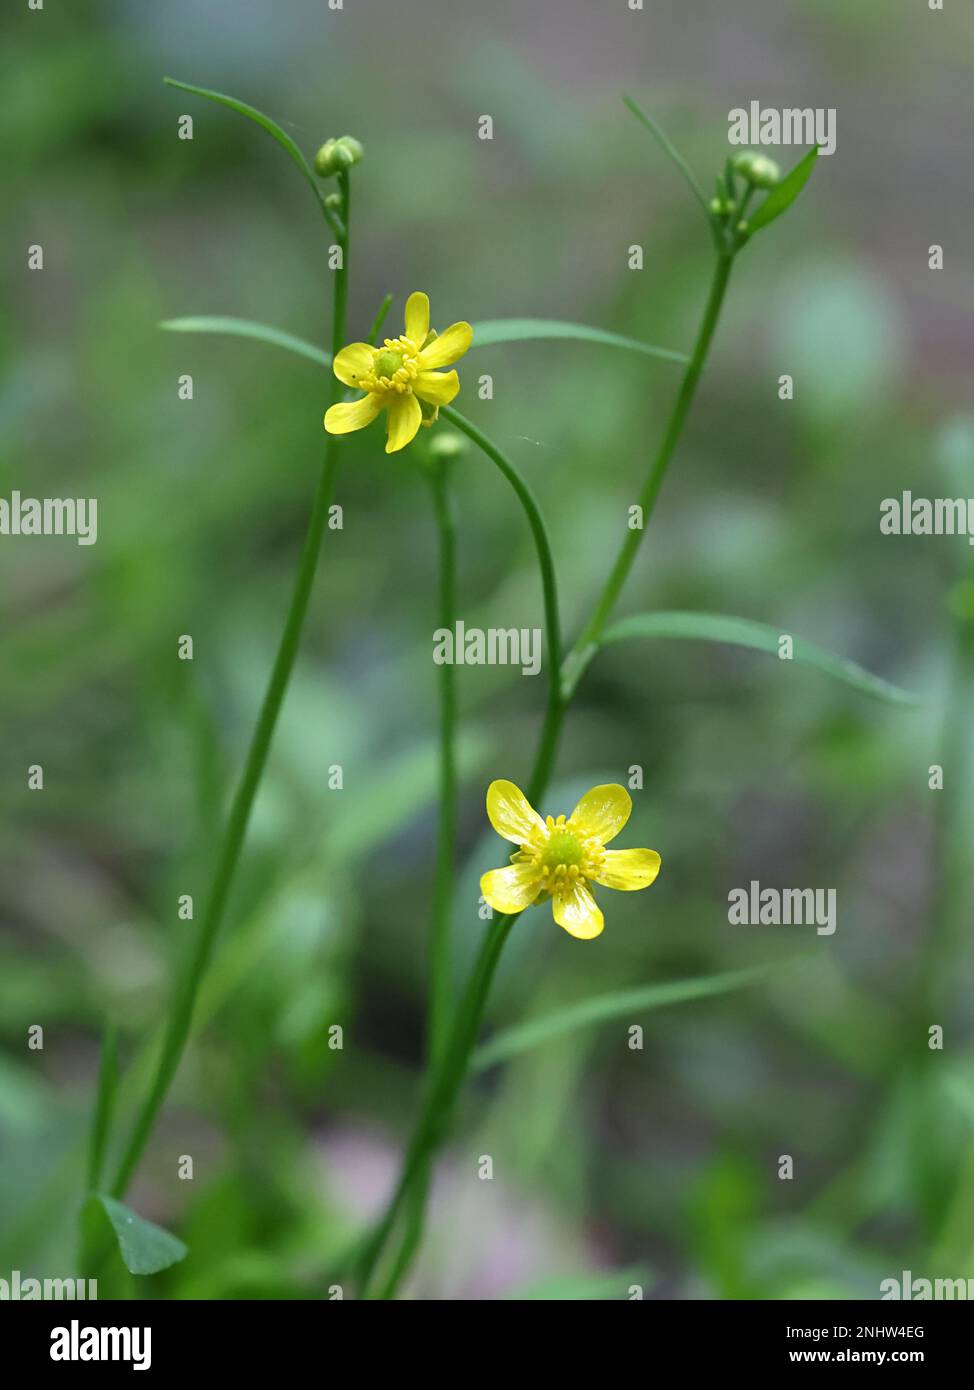 Ranunculus flammula, commonly known as Lesser Spearwort, wild flower from Finland Stock Photo